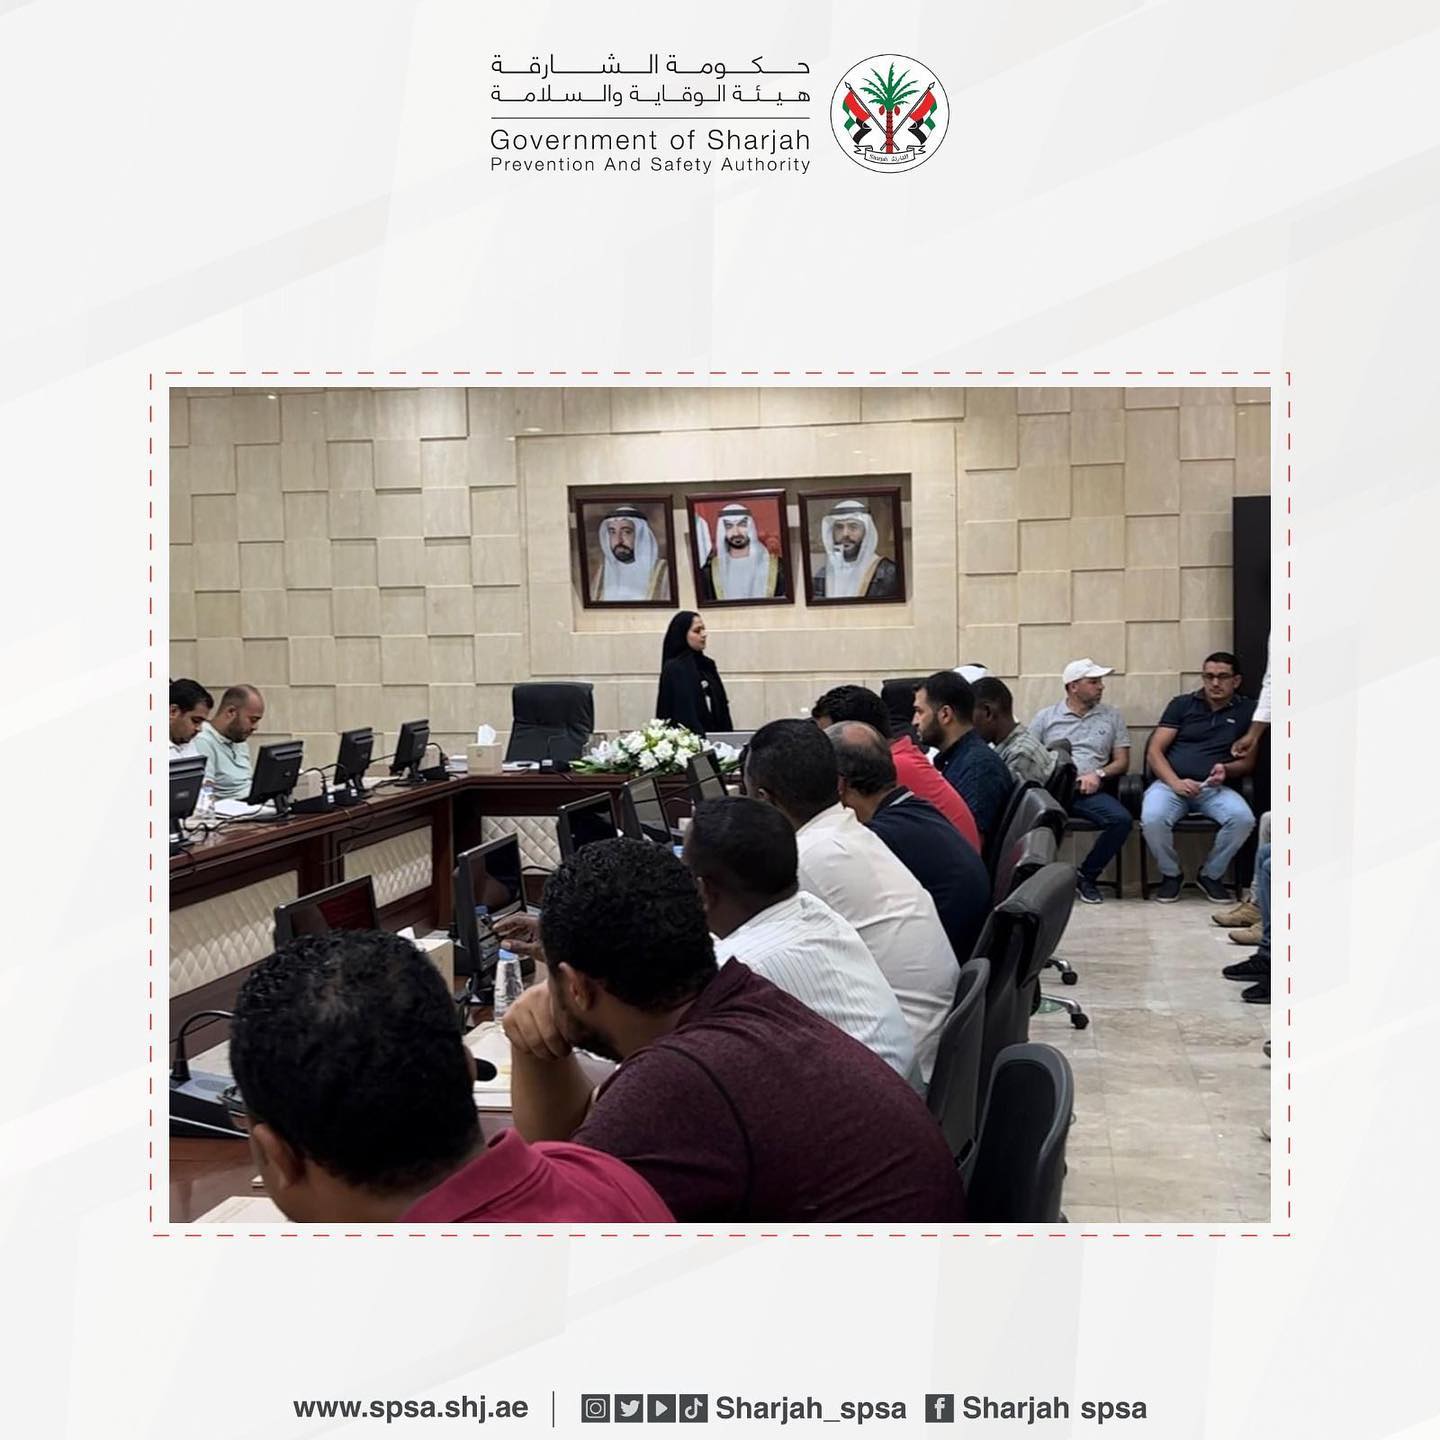 The Prevention and Safety Authority holds an introductory program on the Sharjah Occupational Safety and Health System